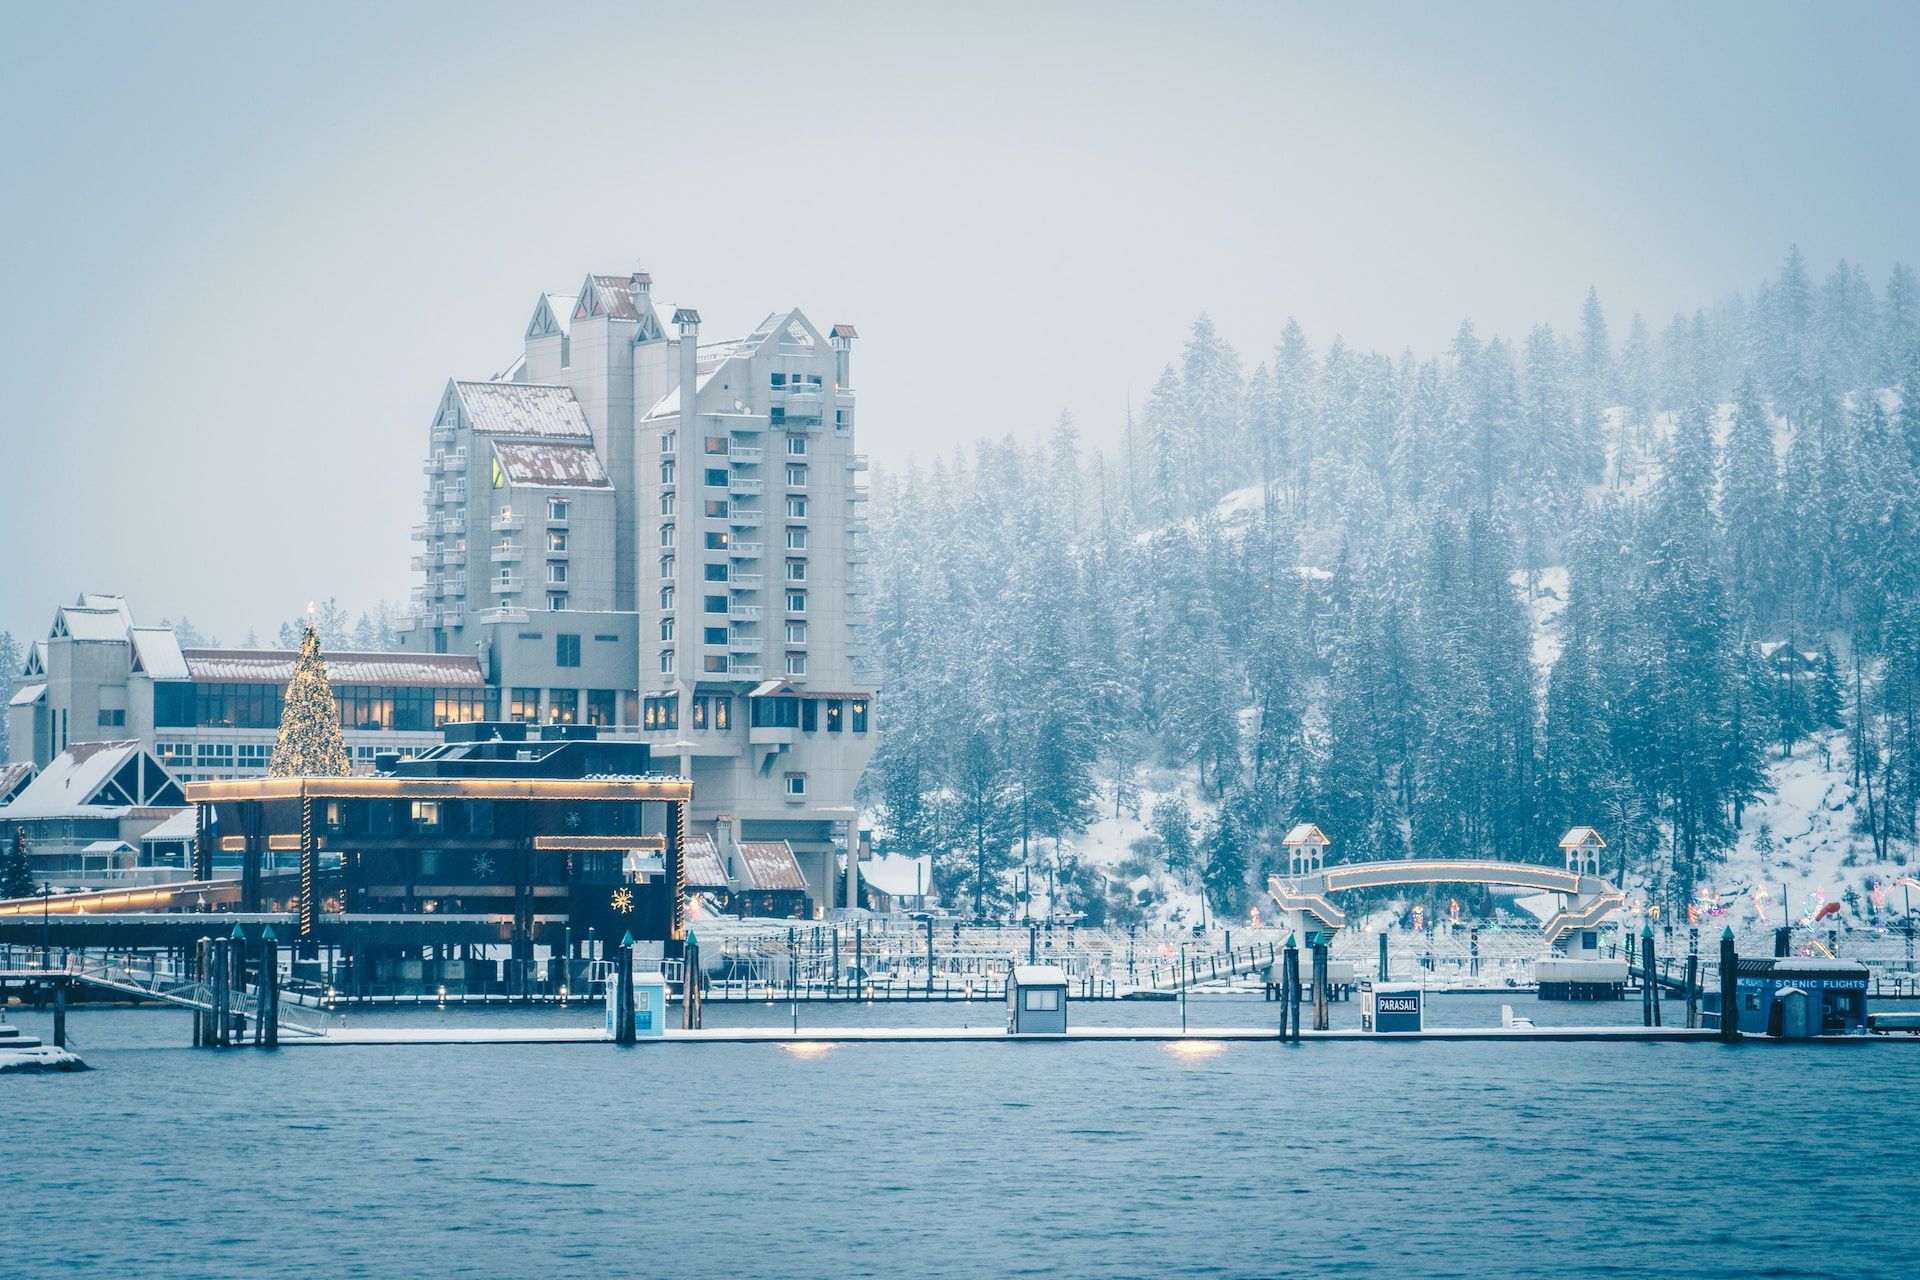 A section of Coeur D'alene, Idaho in winter